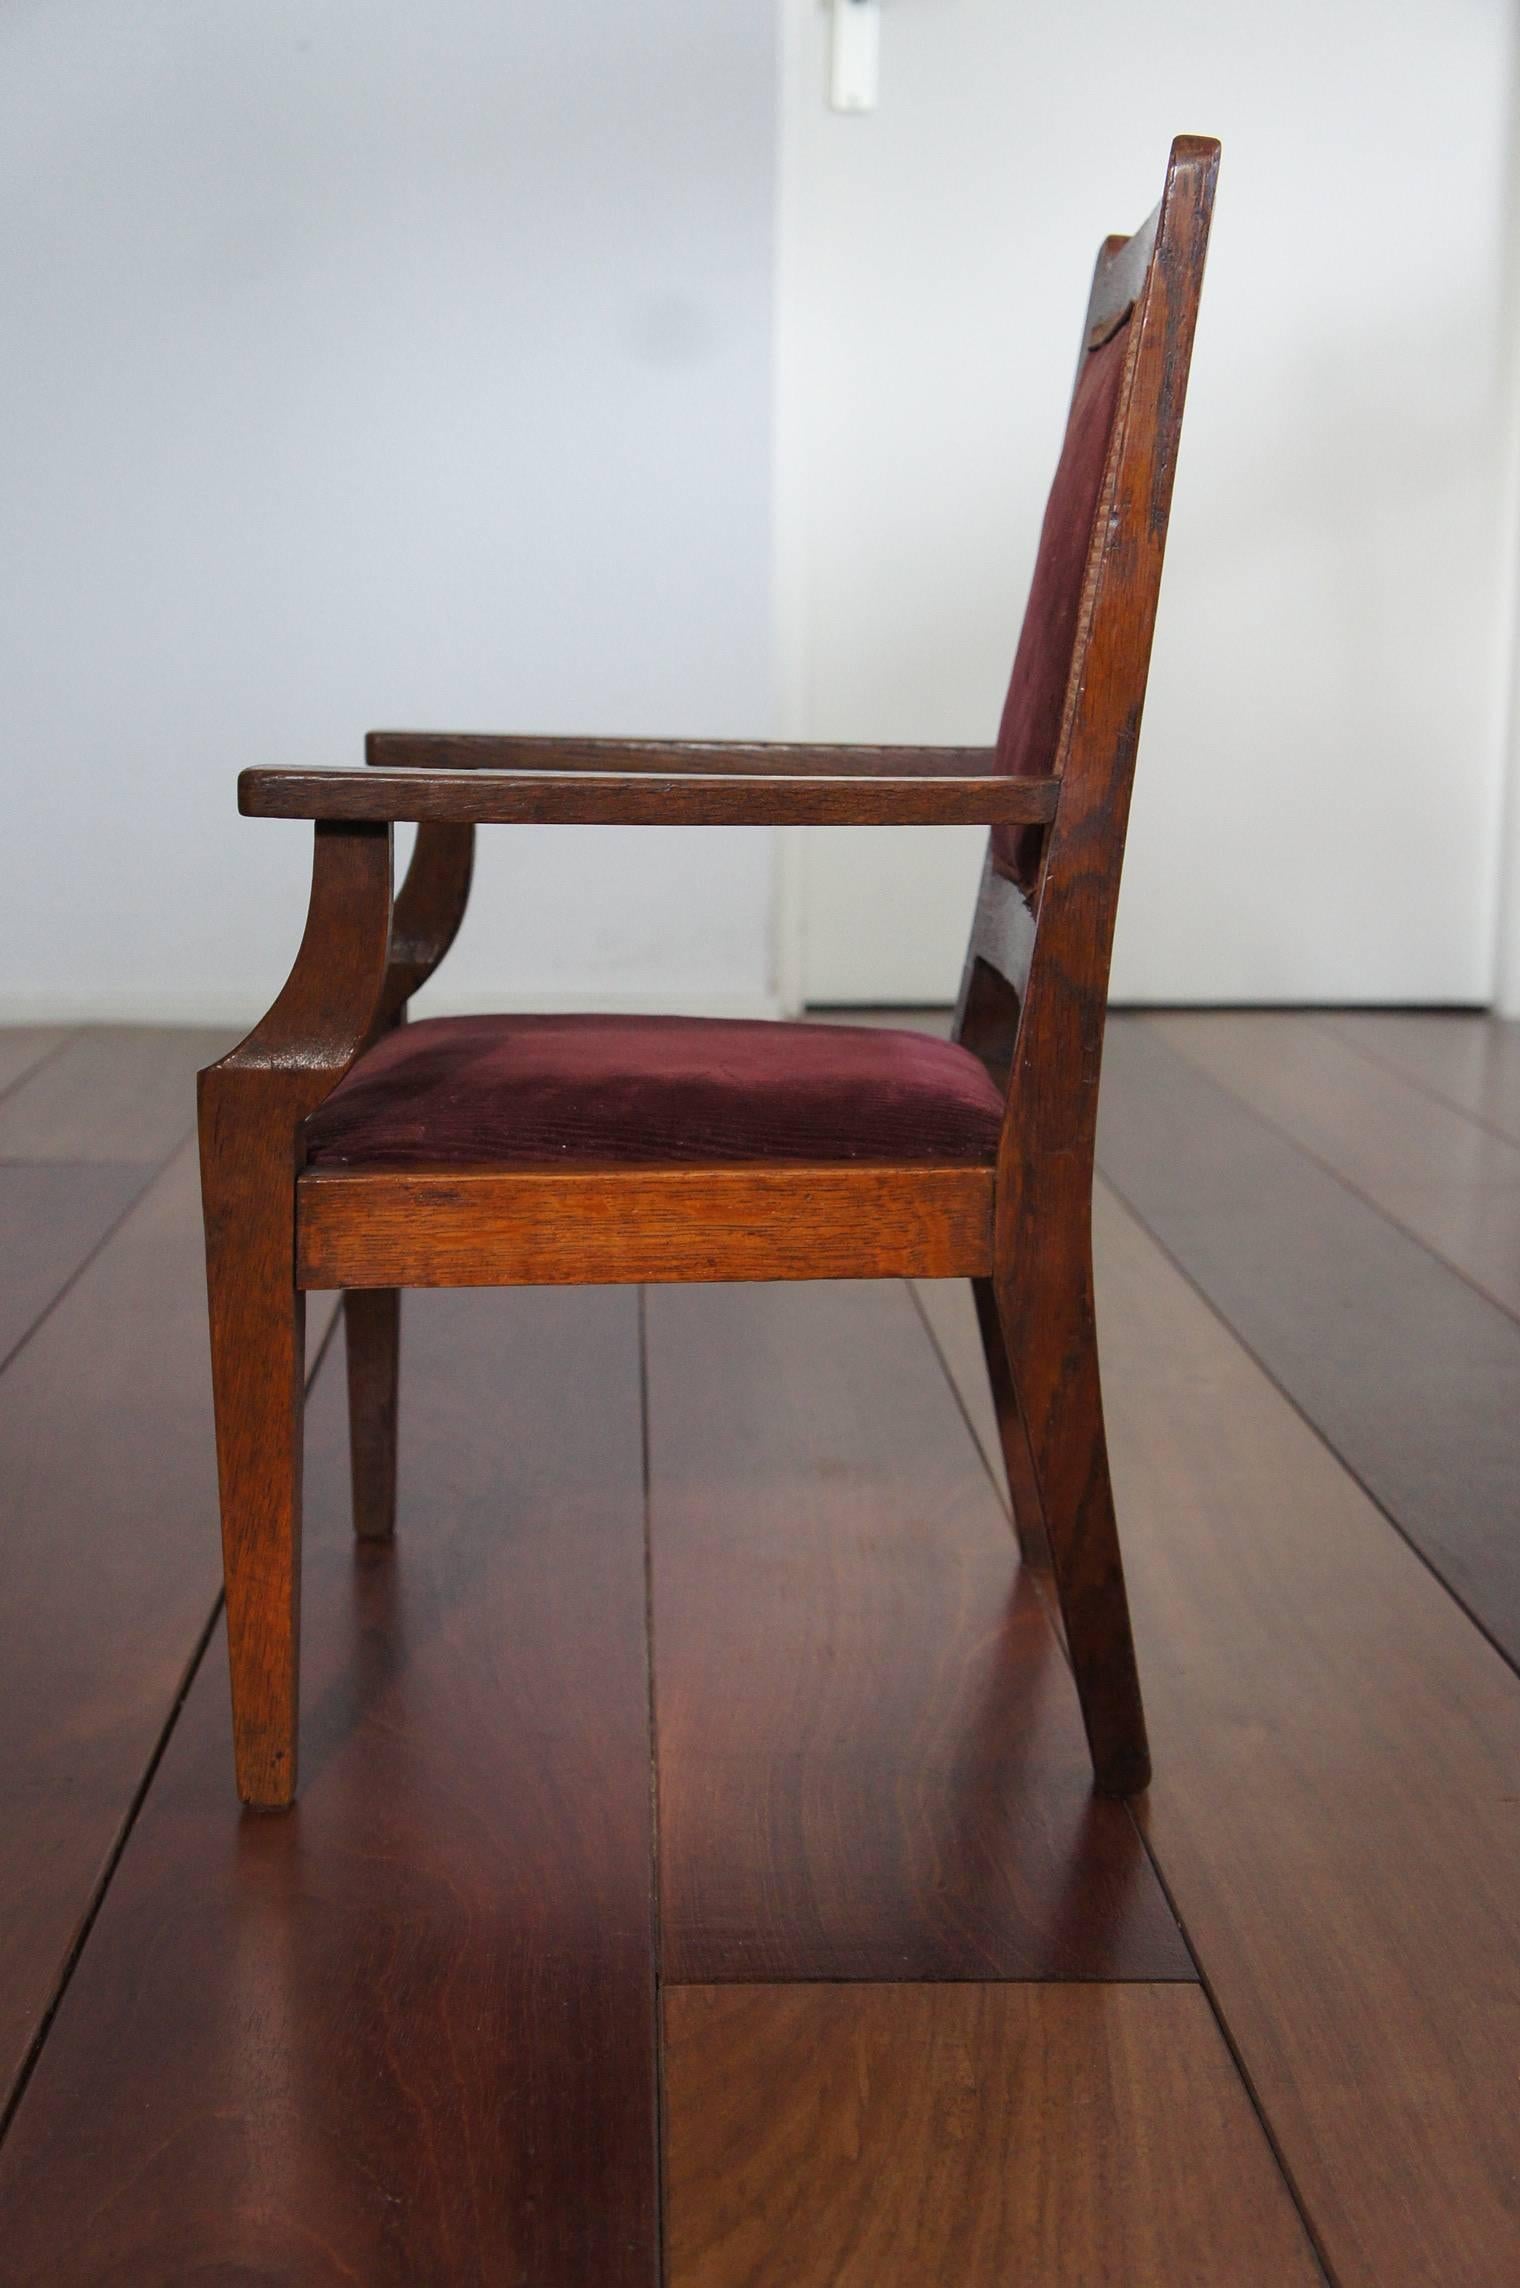 Hand-Crafted Arts and Crafts Children's or Miniature Chair Attributed to Jac van den Bosch For Sale